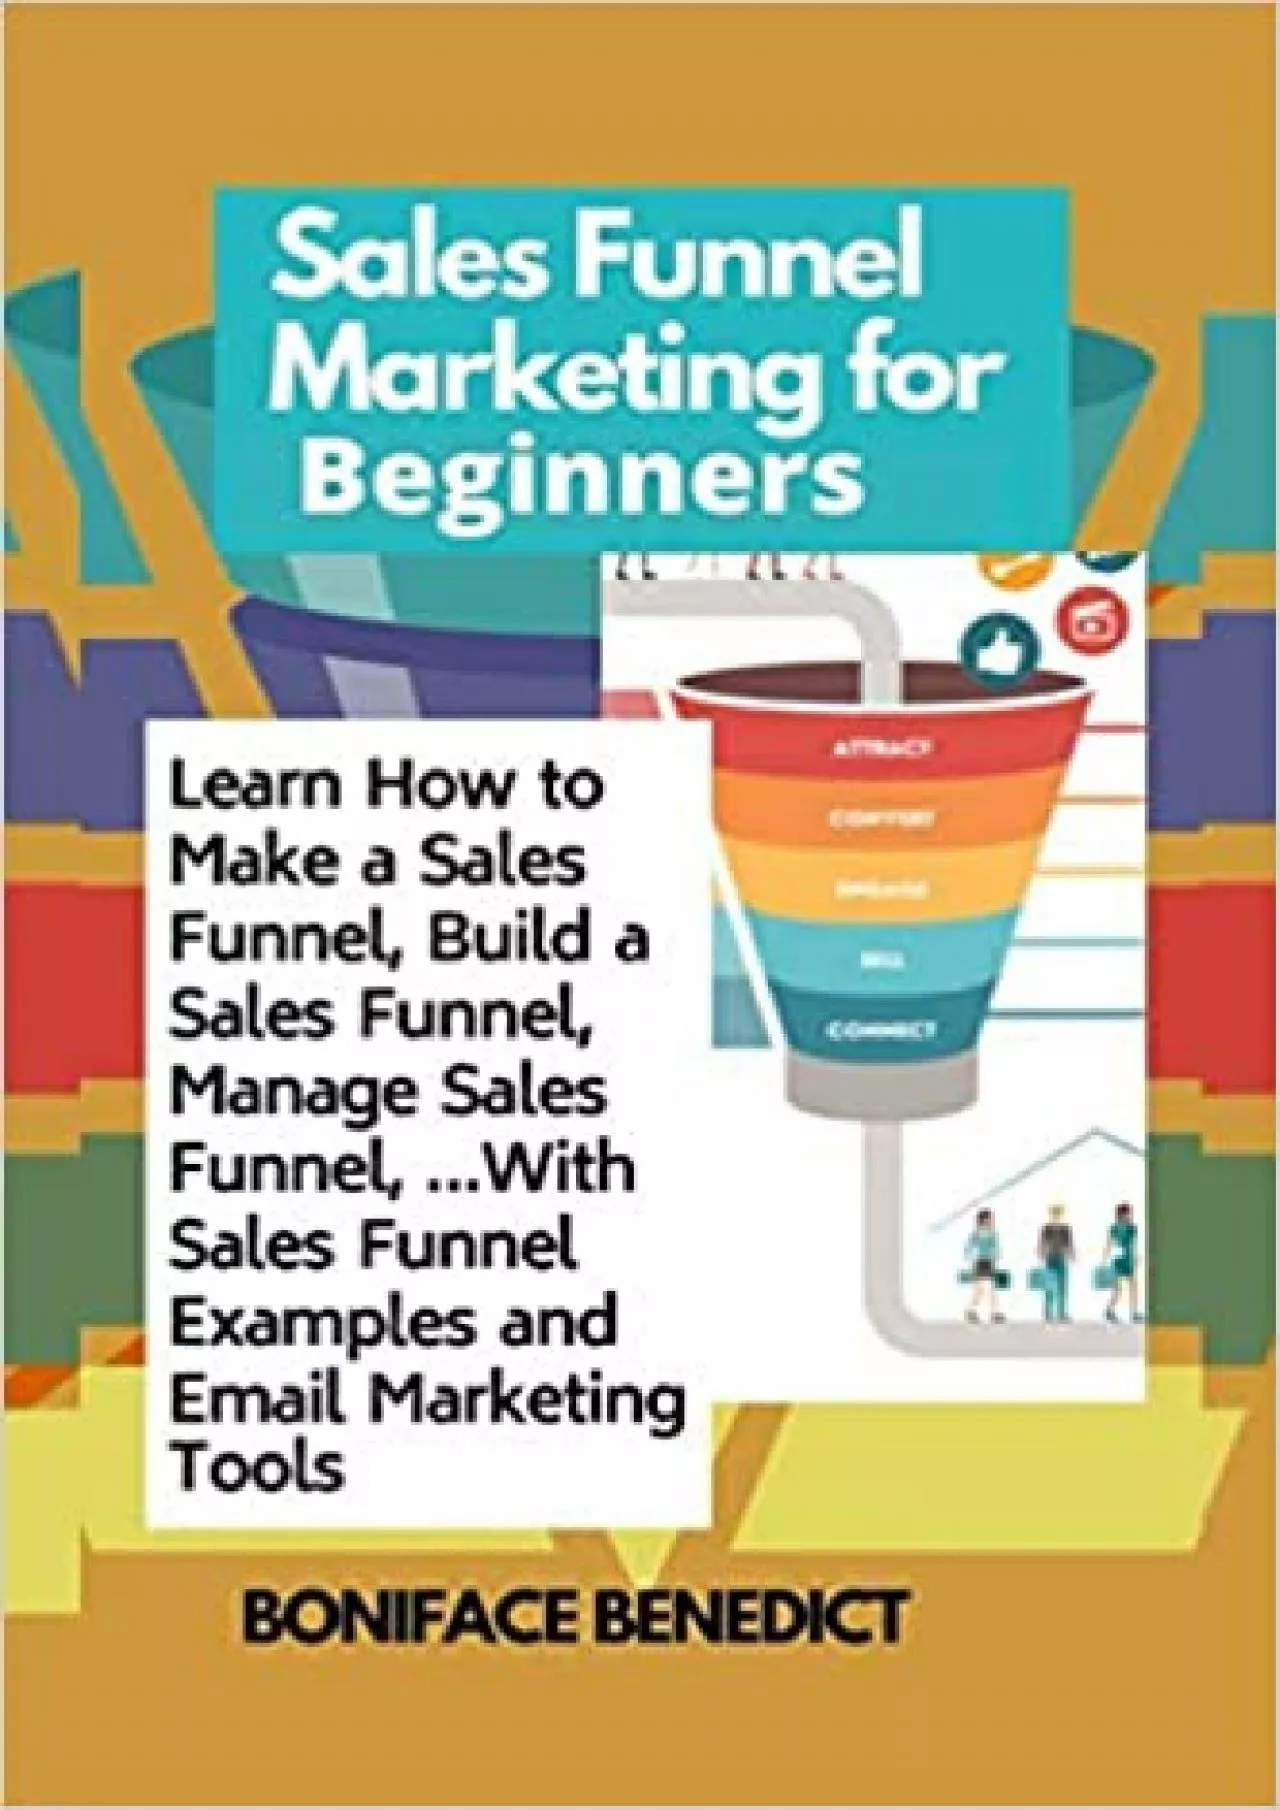 Sales Funnel Marketing for Beginners Learn How to Make a Sales Funnel Build a Sales Funnel